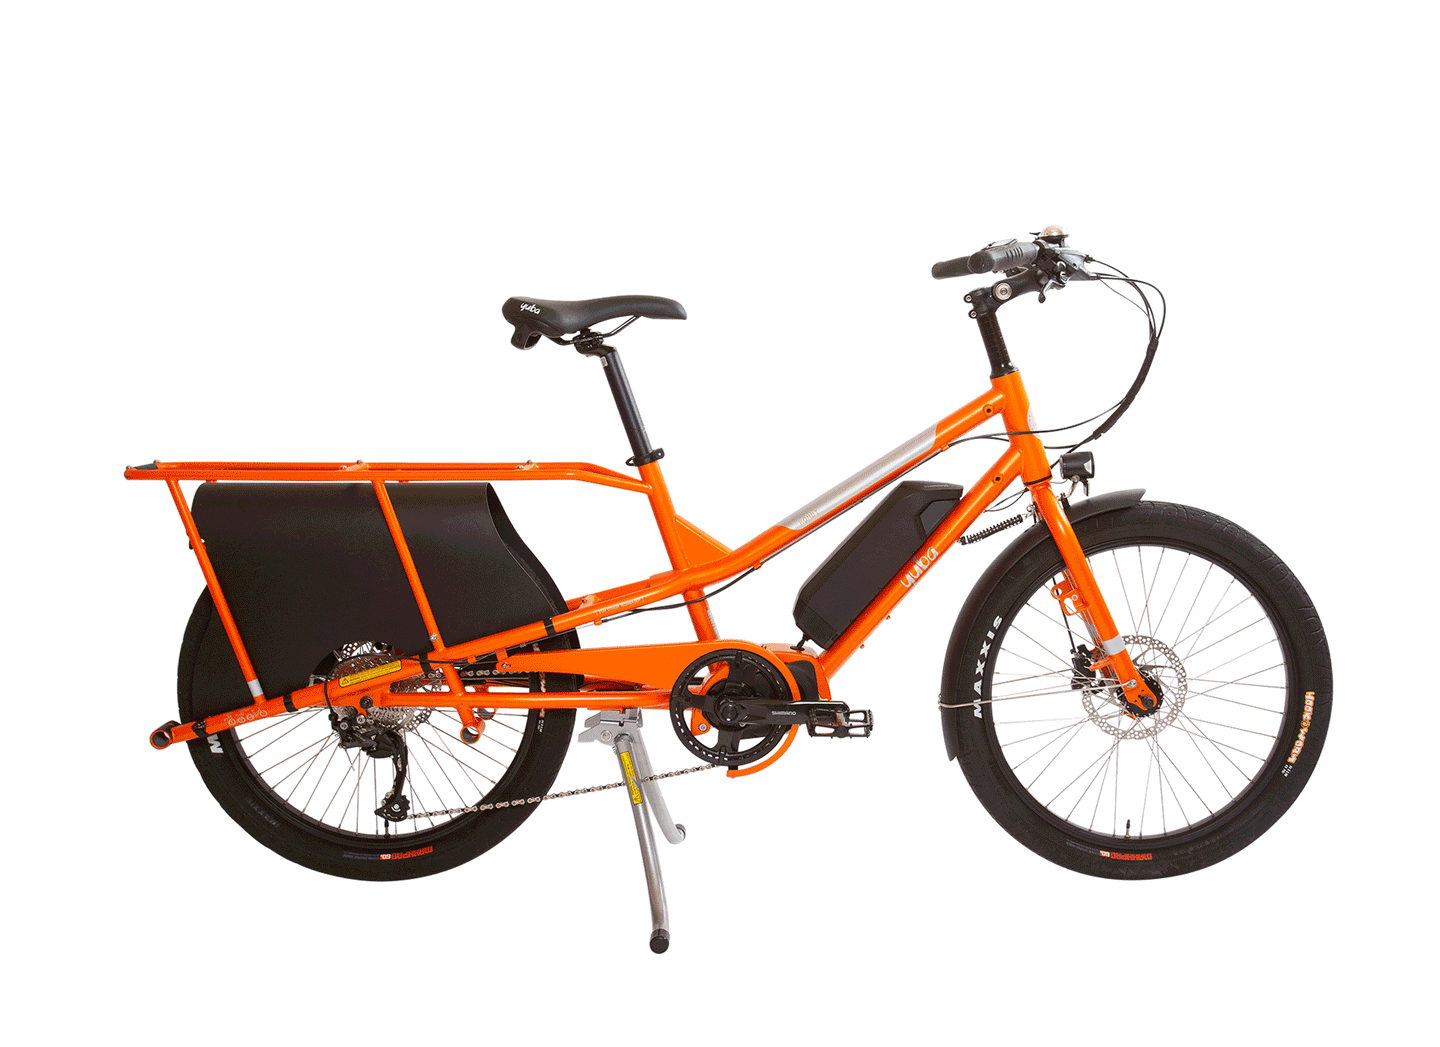 An animated gif showing the various configurations of the Kombi E5 electric longtail cargo bike which can be hired from LeaseBike. The animation cycles through multiple images of the cargo bike with different accessories including child seats, baskets and carrier bags.